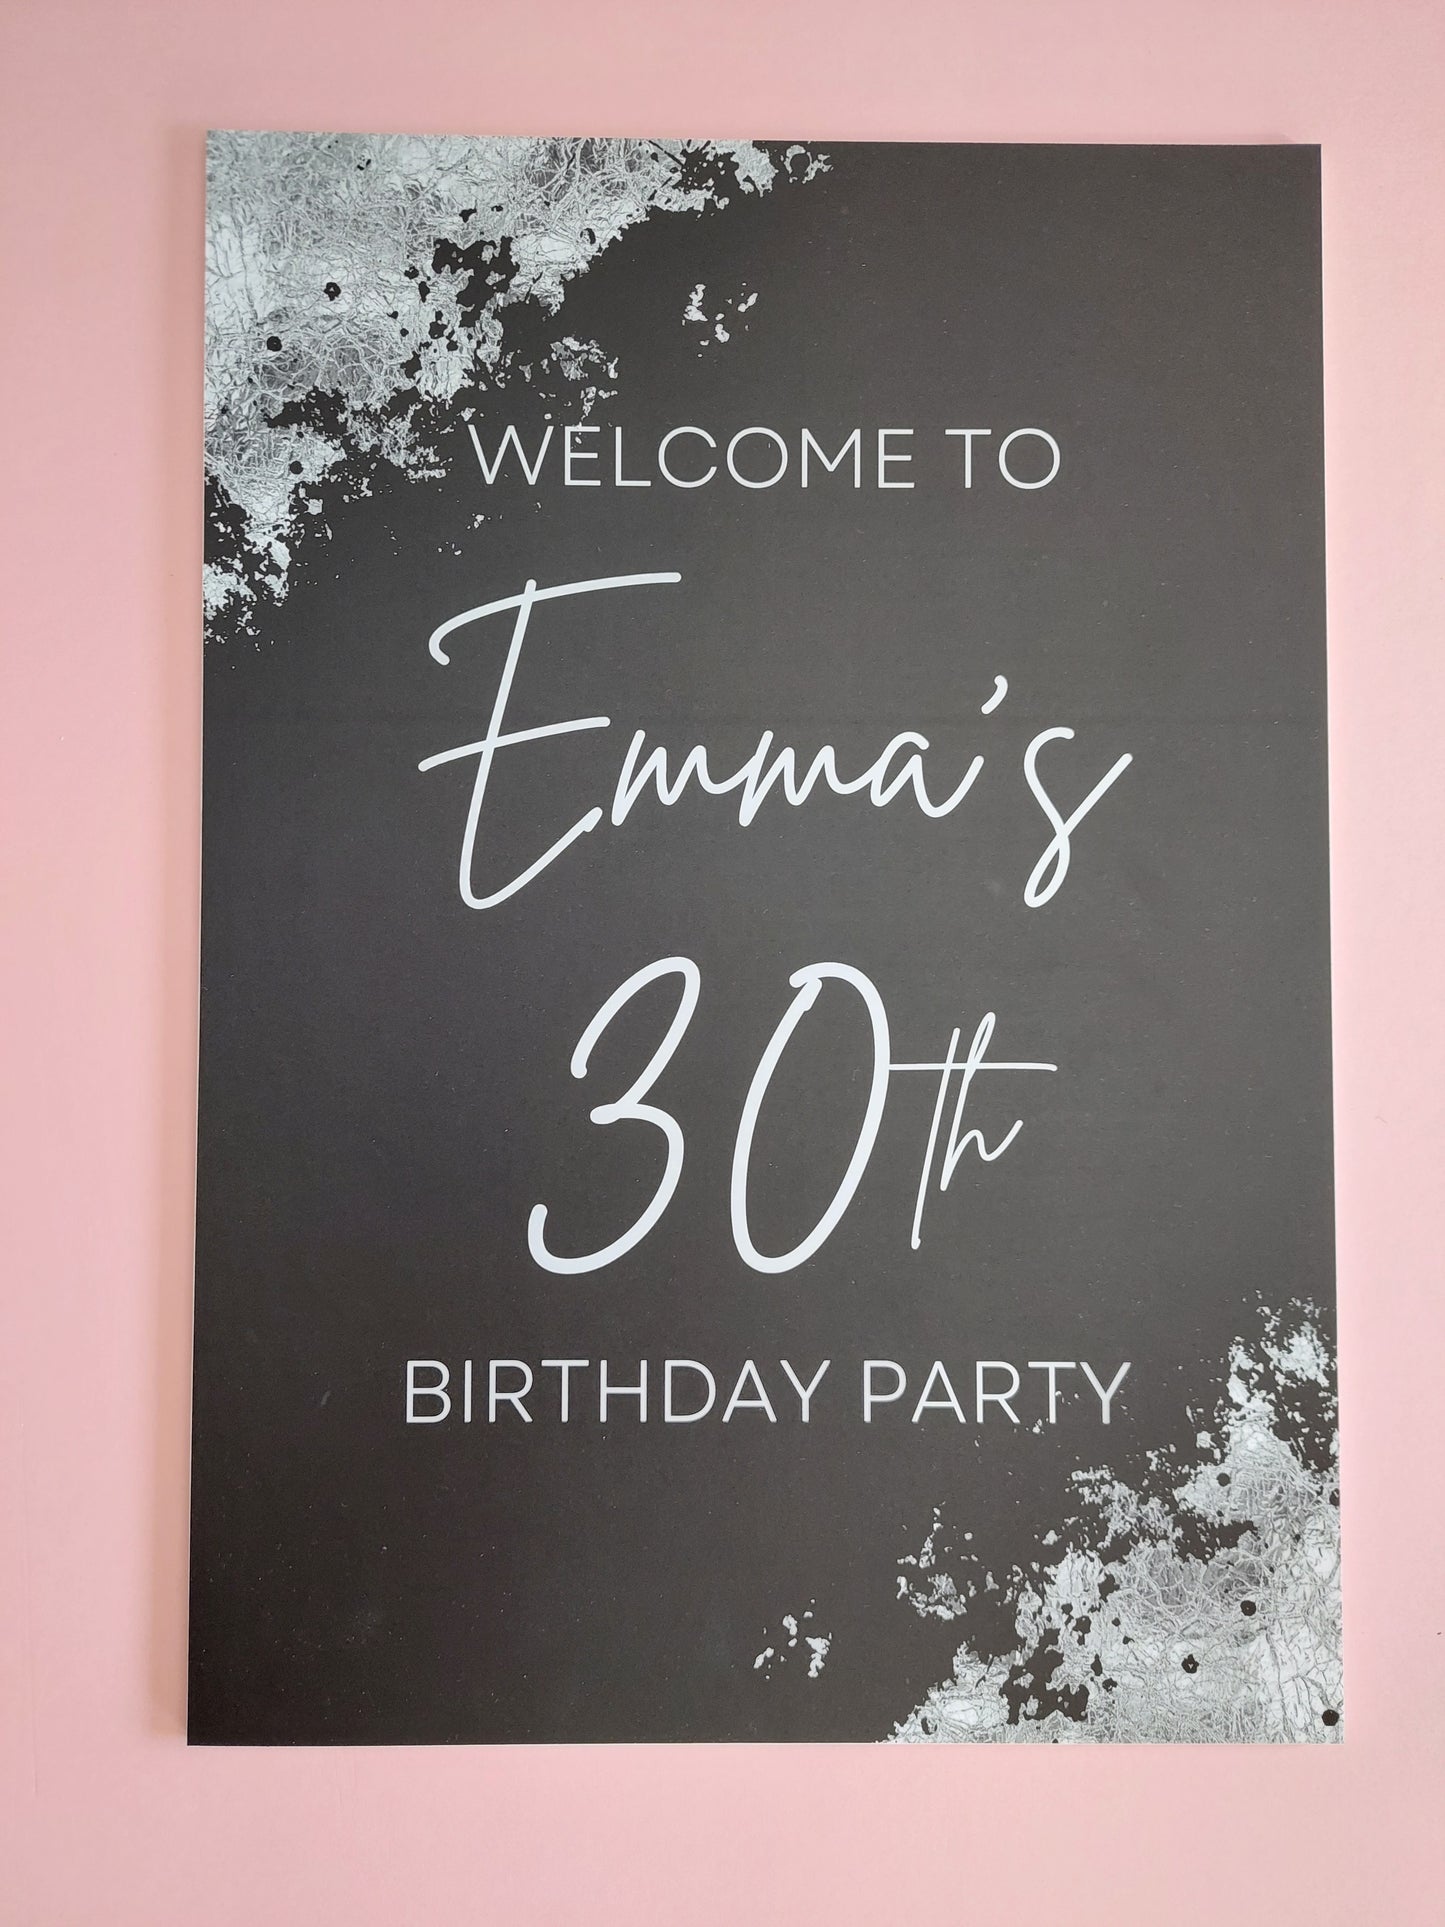 Emma's 30th Birthday | A3 Black & Silver Welcome Board Sign | Personalised Birthday Board | SALE ITEM